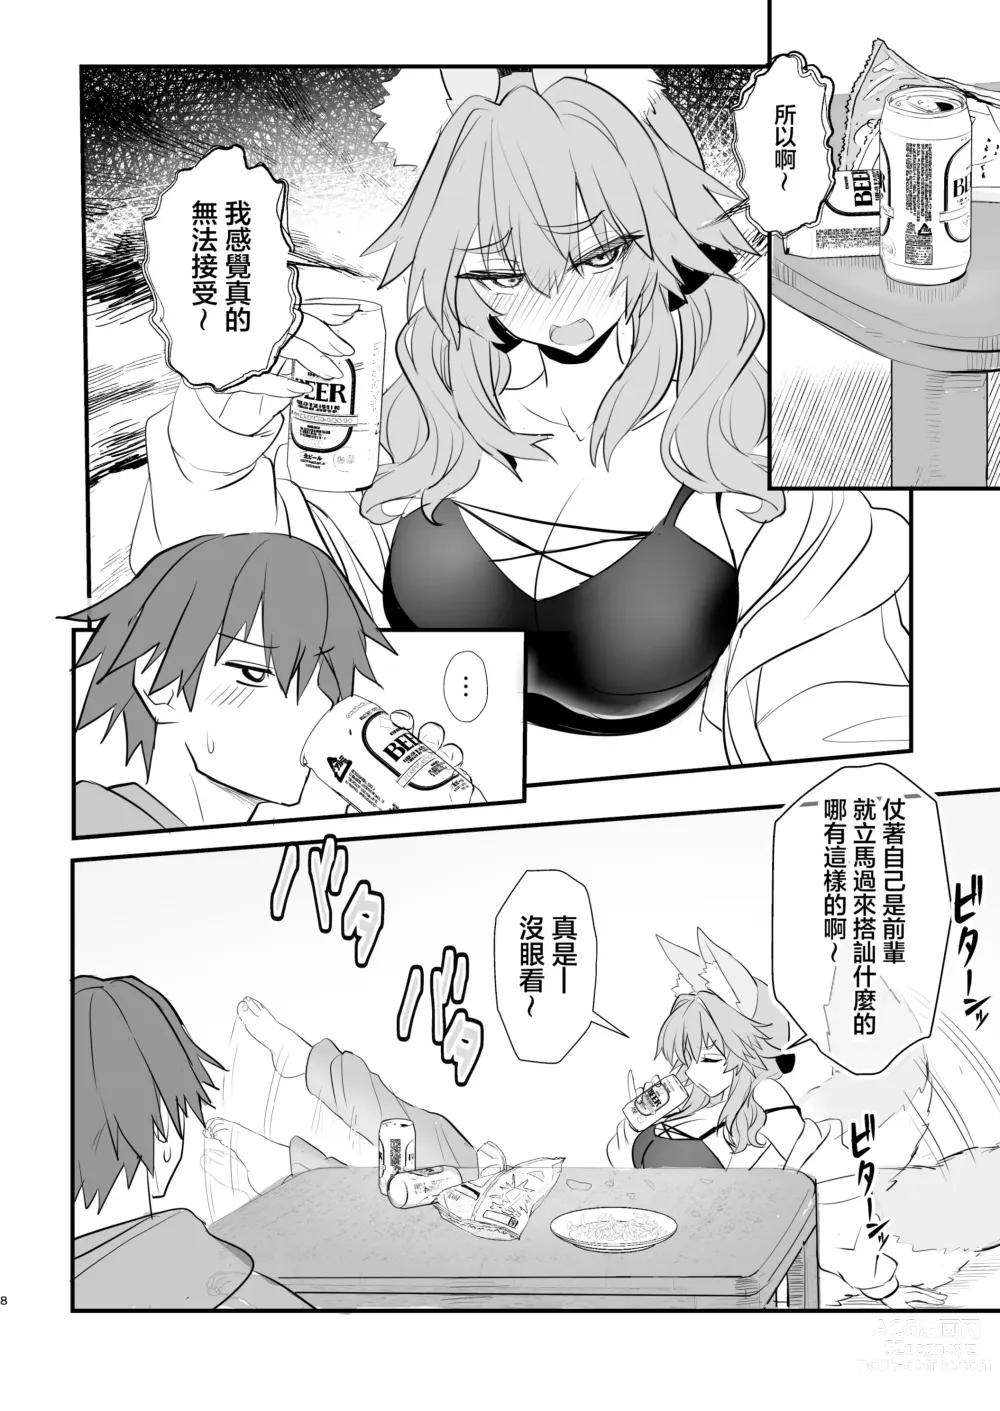 Page 7 of doujinshi 玉藻前大學物語